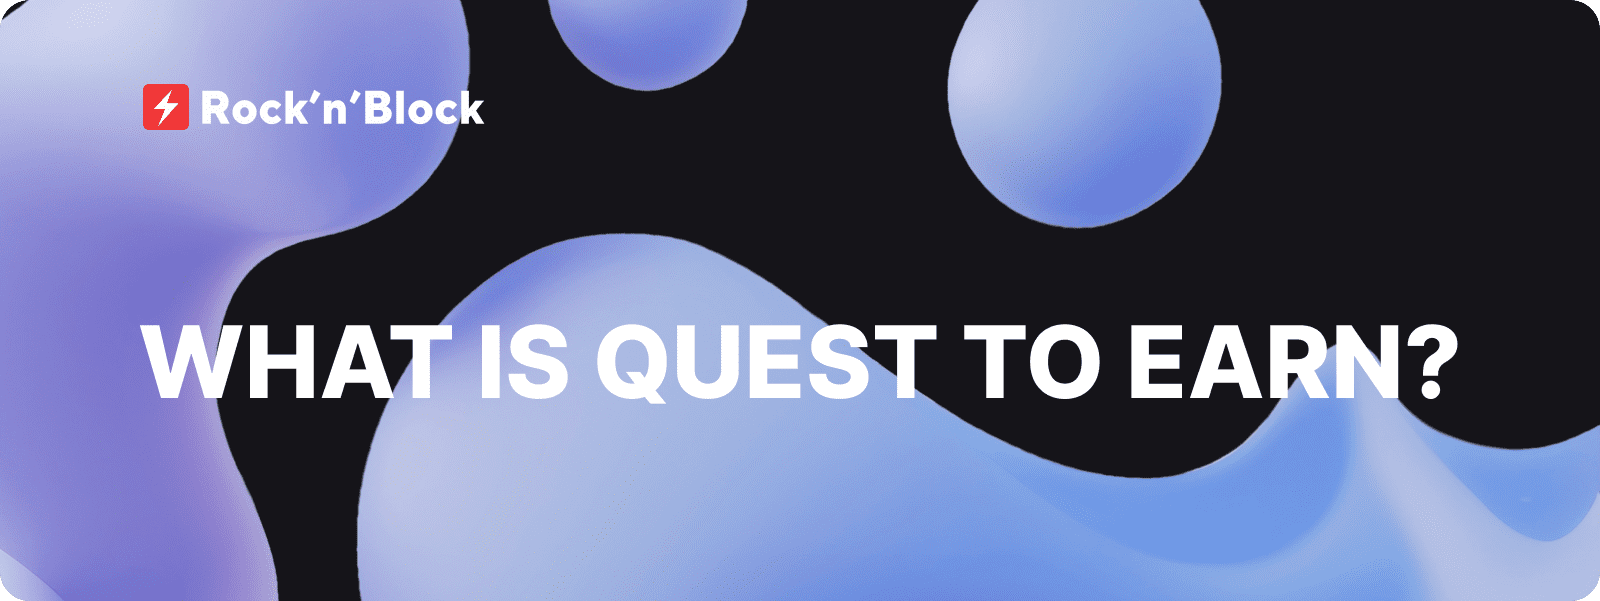 What is Quest to Earn?